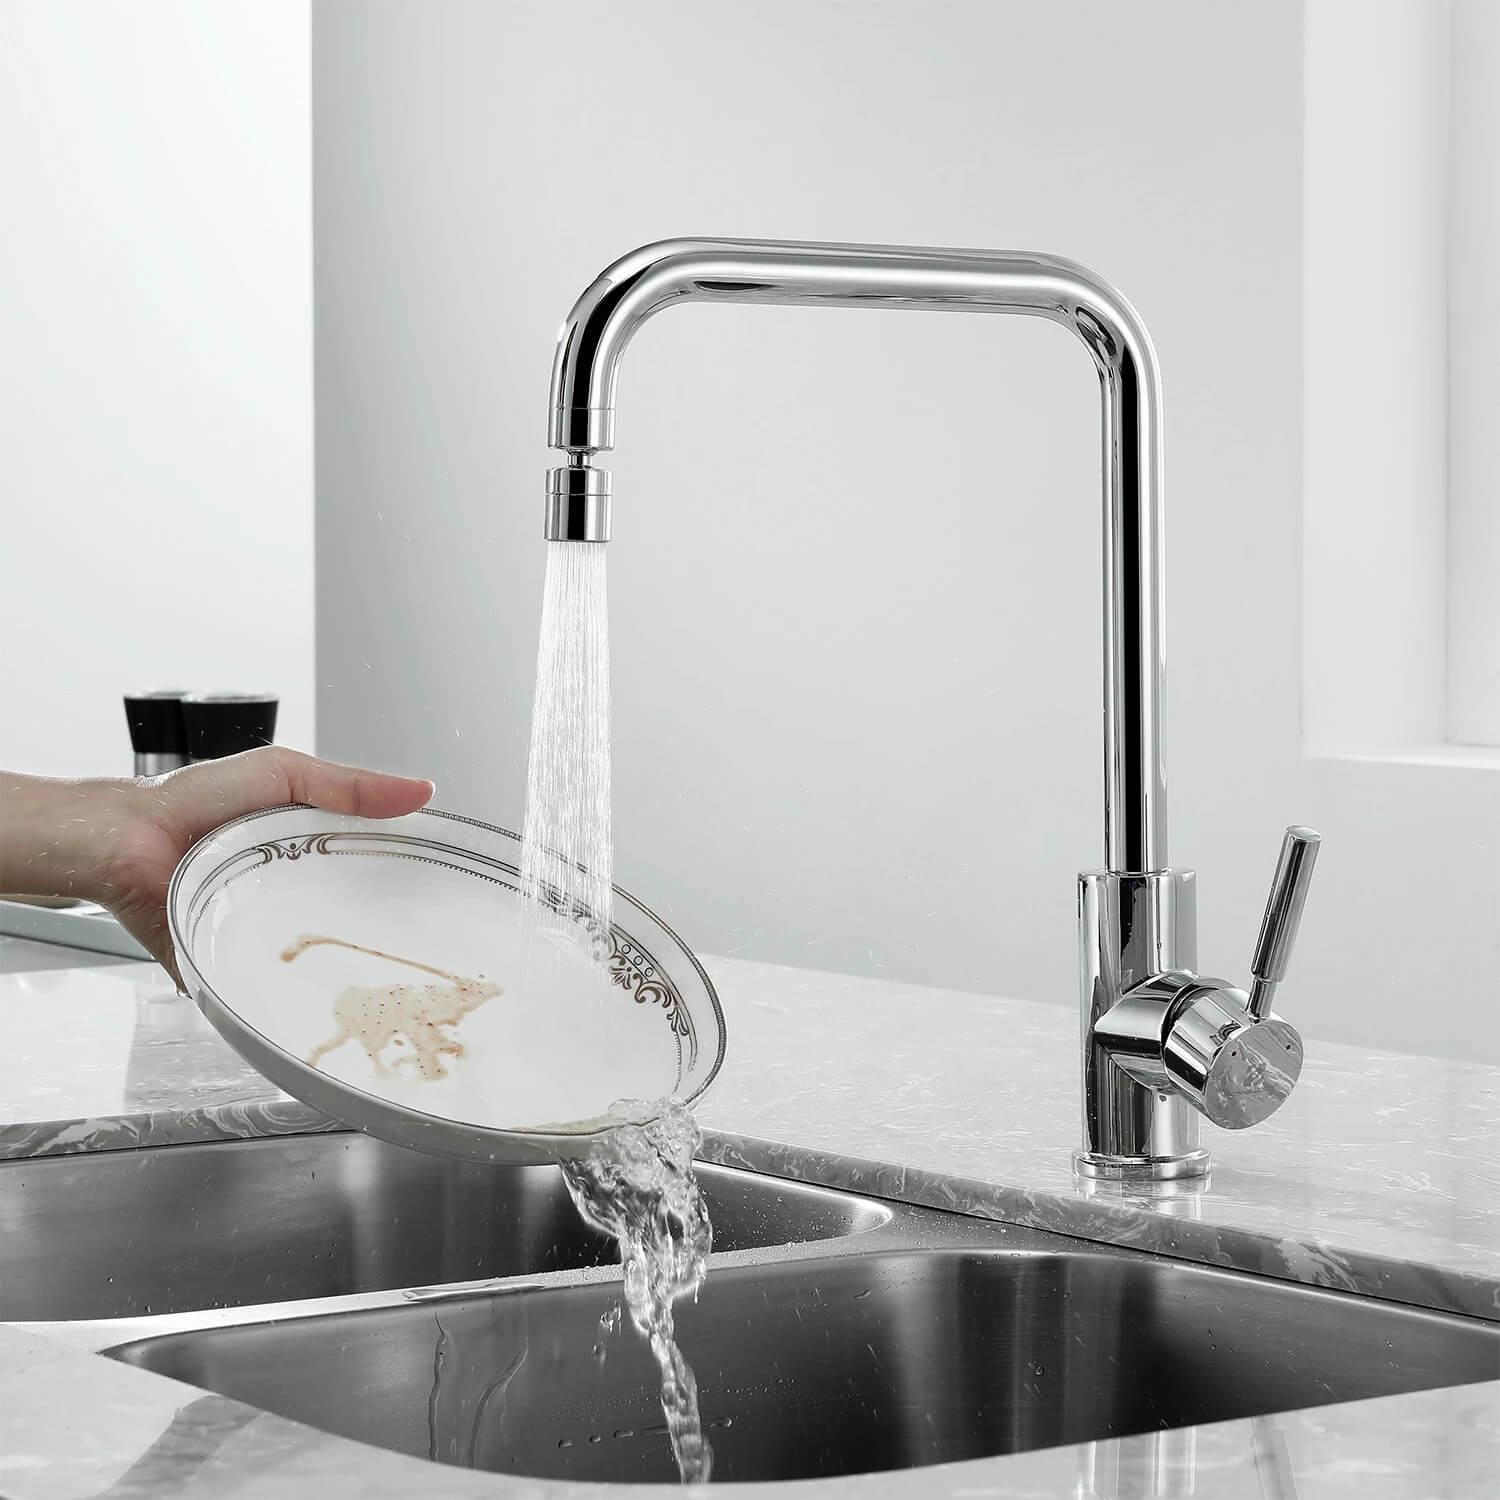 360 ° rotatable kitchen sink faucet